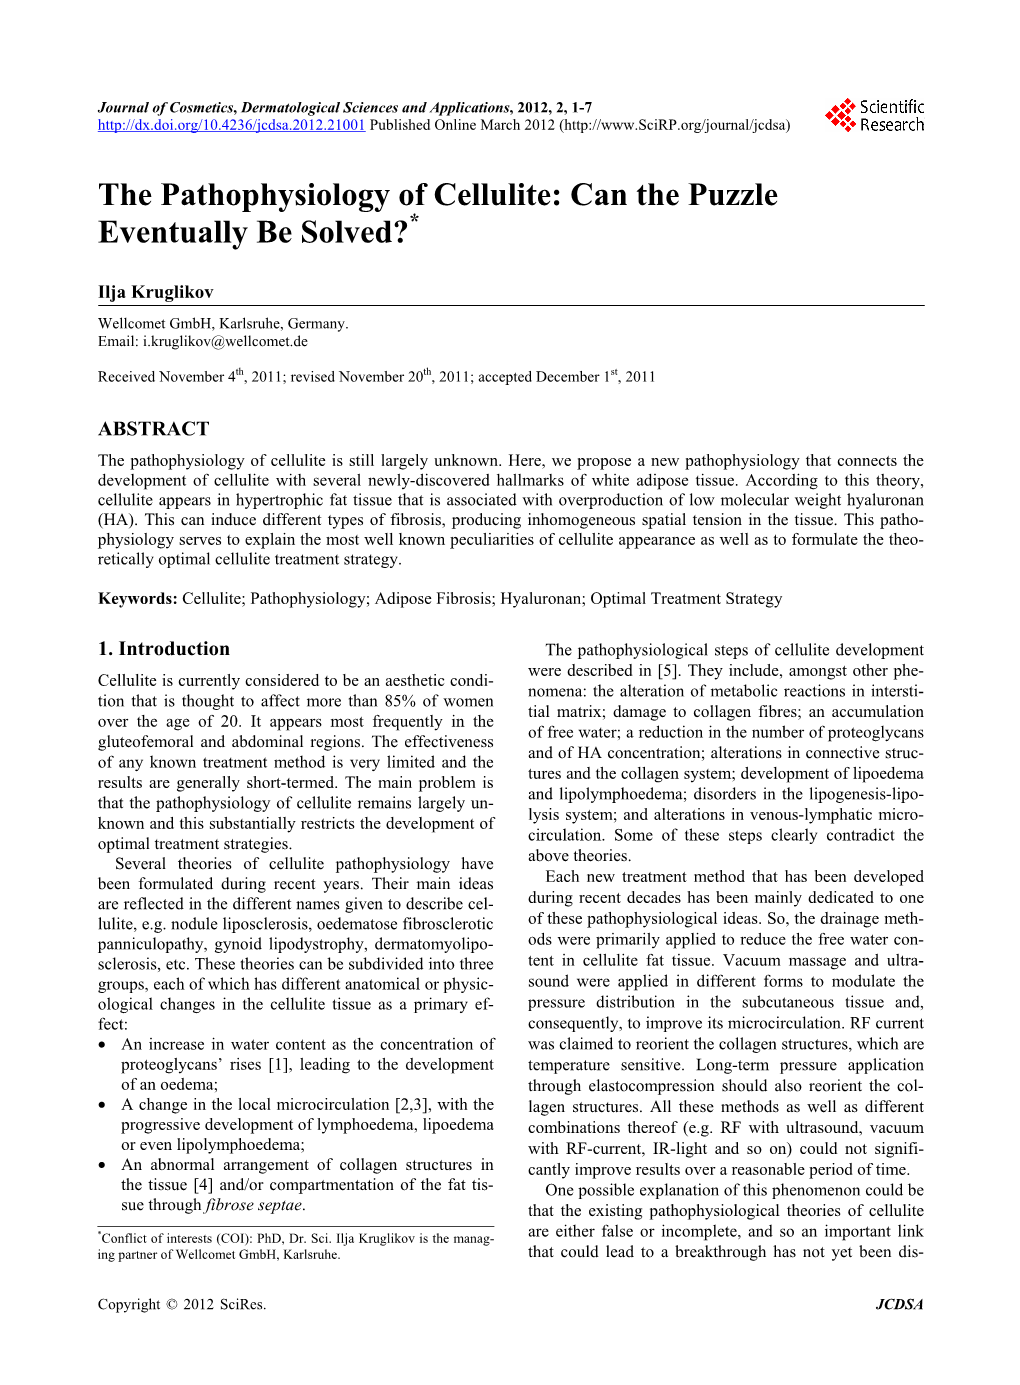 The Pathophysiology of Cellulite: Can the Puzzle Eventually Be Solved?*